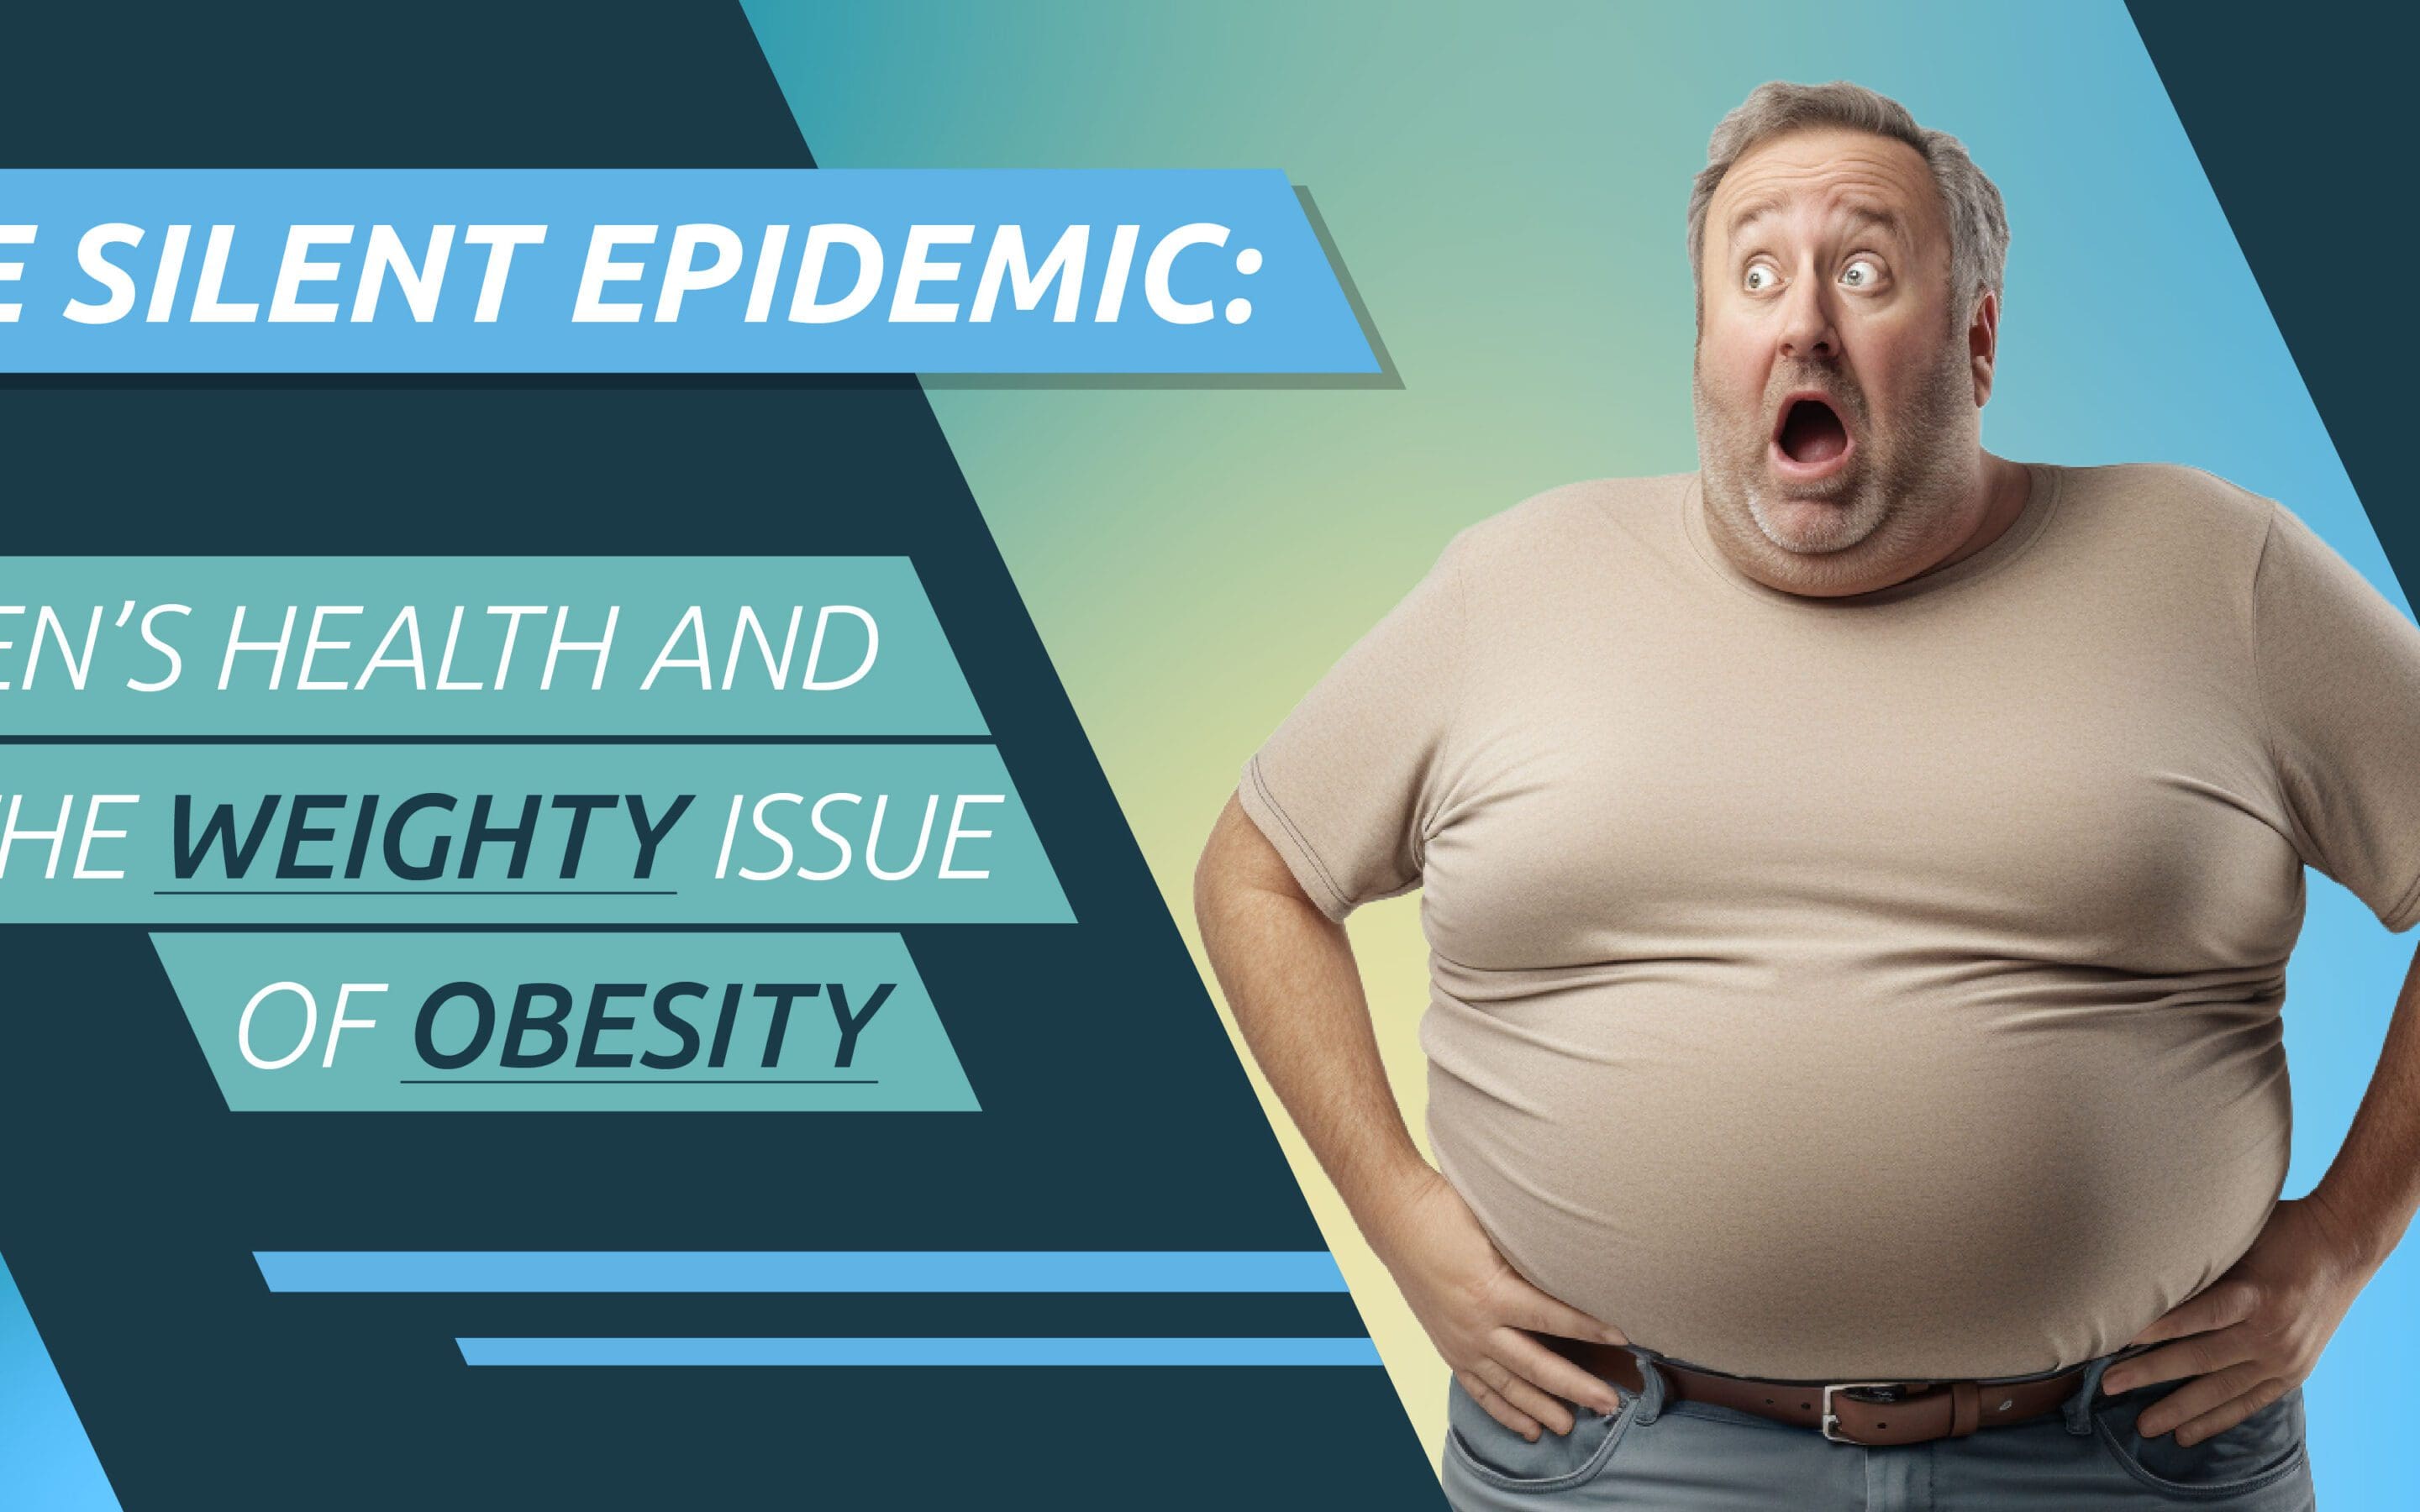 The Silent Epidemic: Men’s Health and the Weighty Issue of Obesity